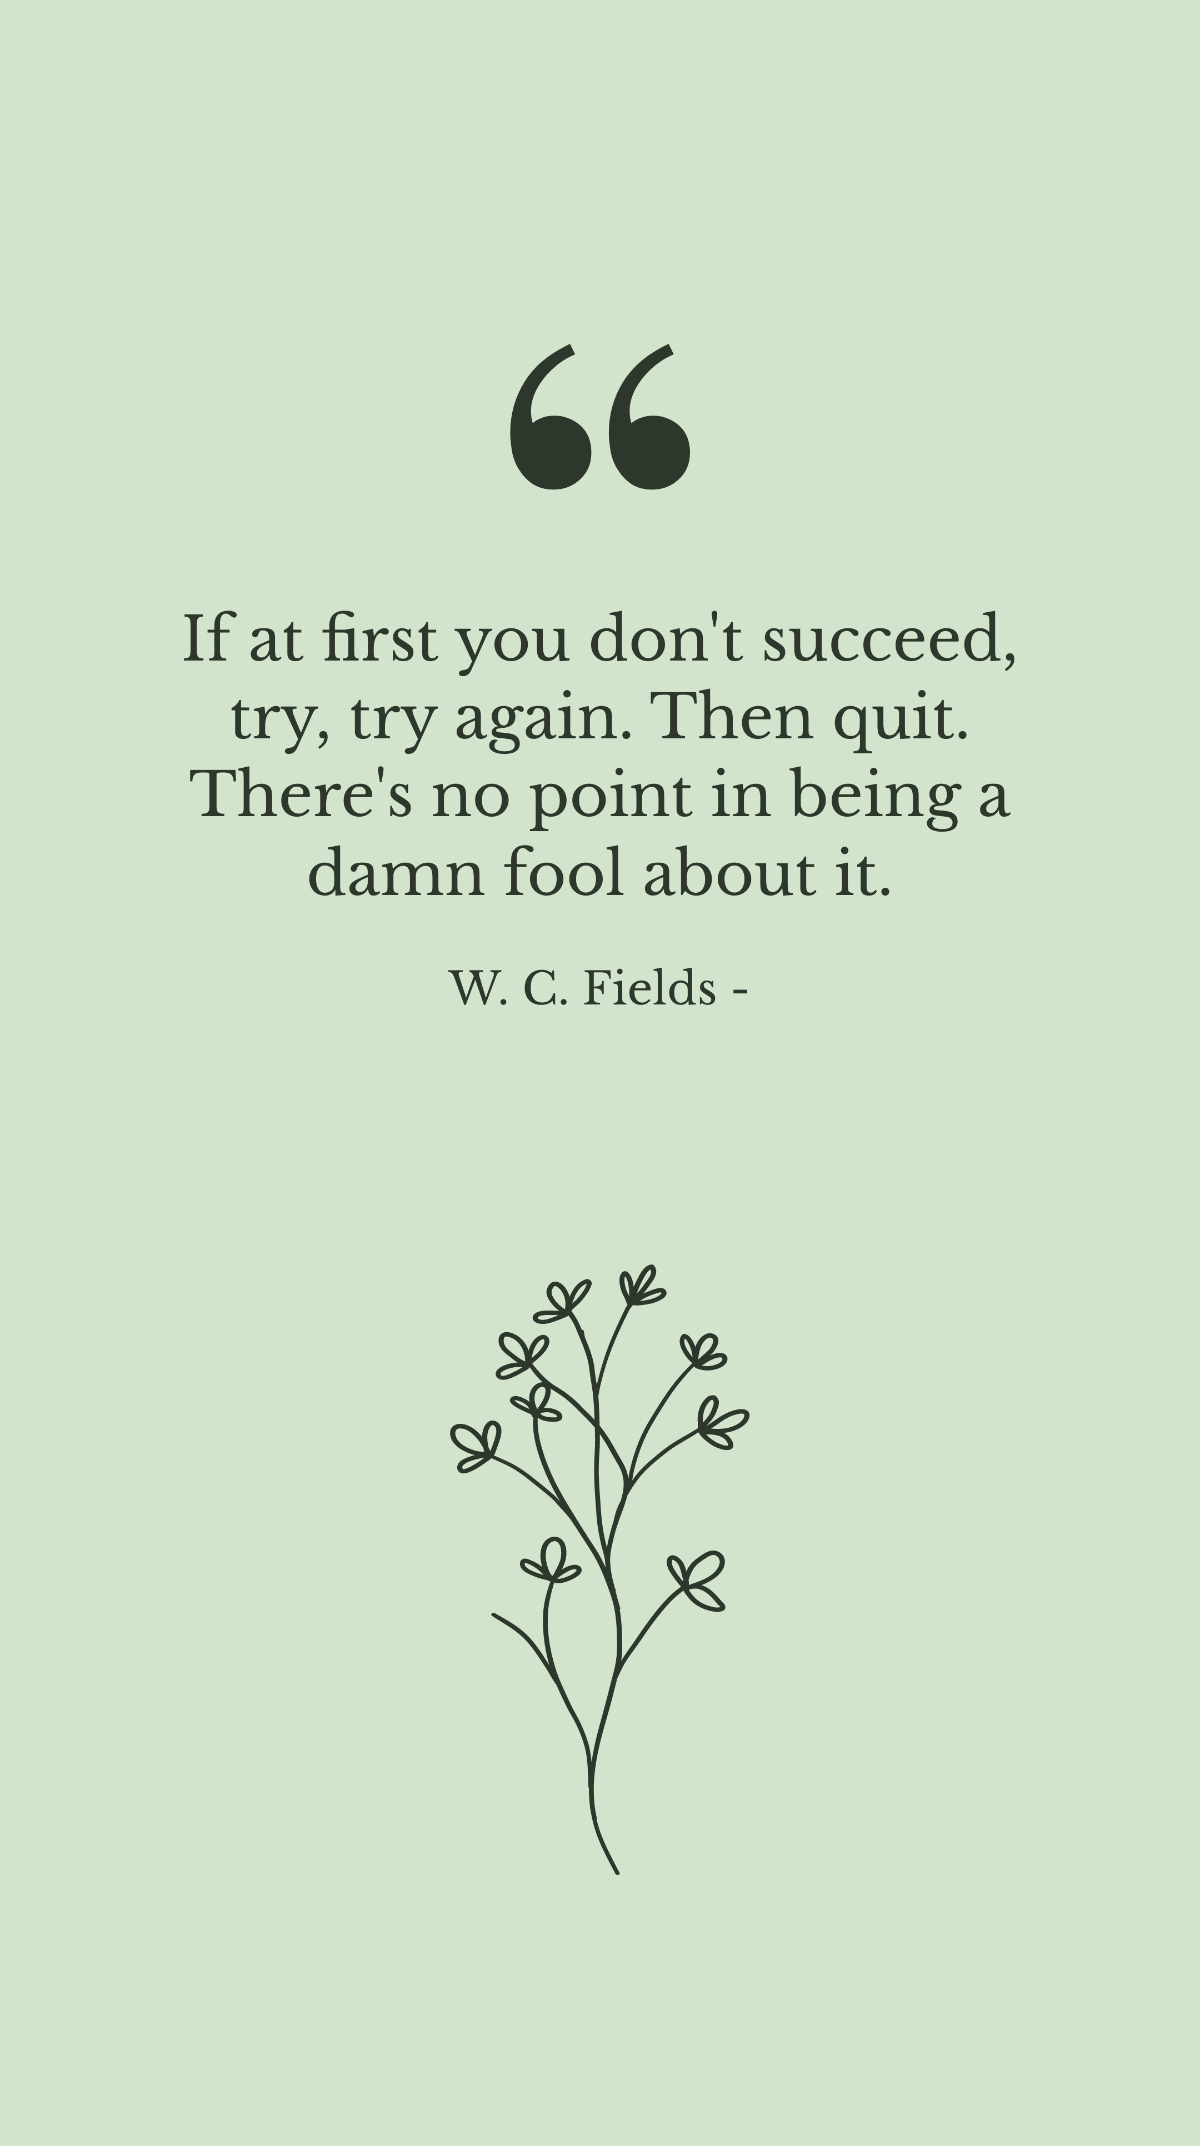 W. C. Fields - If at first you don't succeed, try, try again. Then quit. There's no point in being a damn fool about it. Template